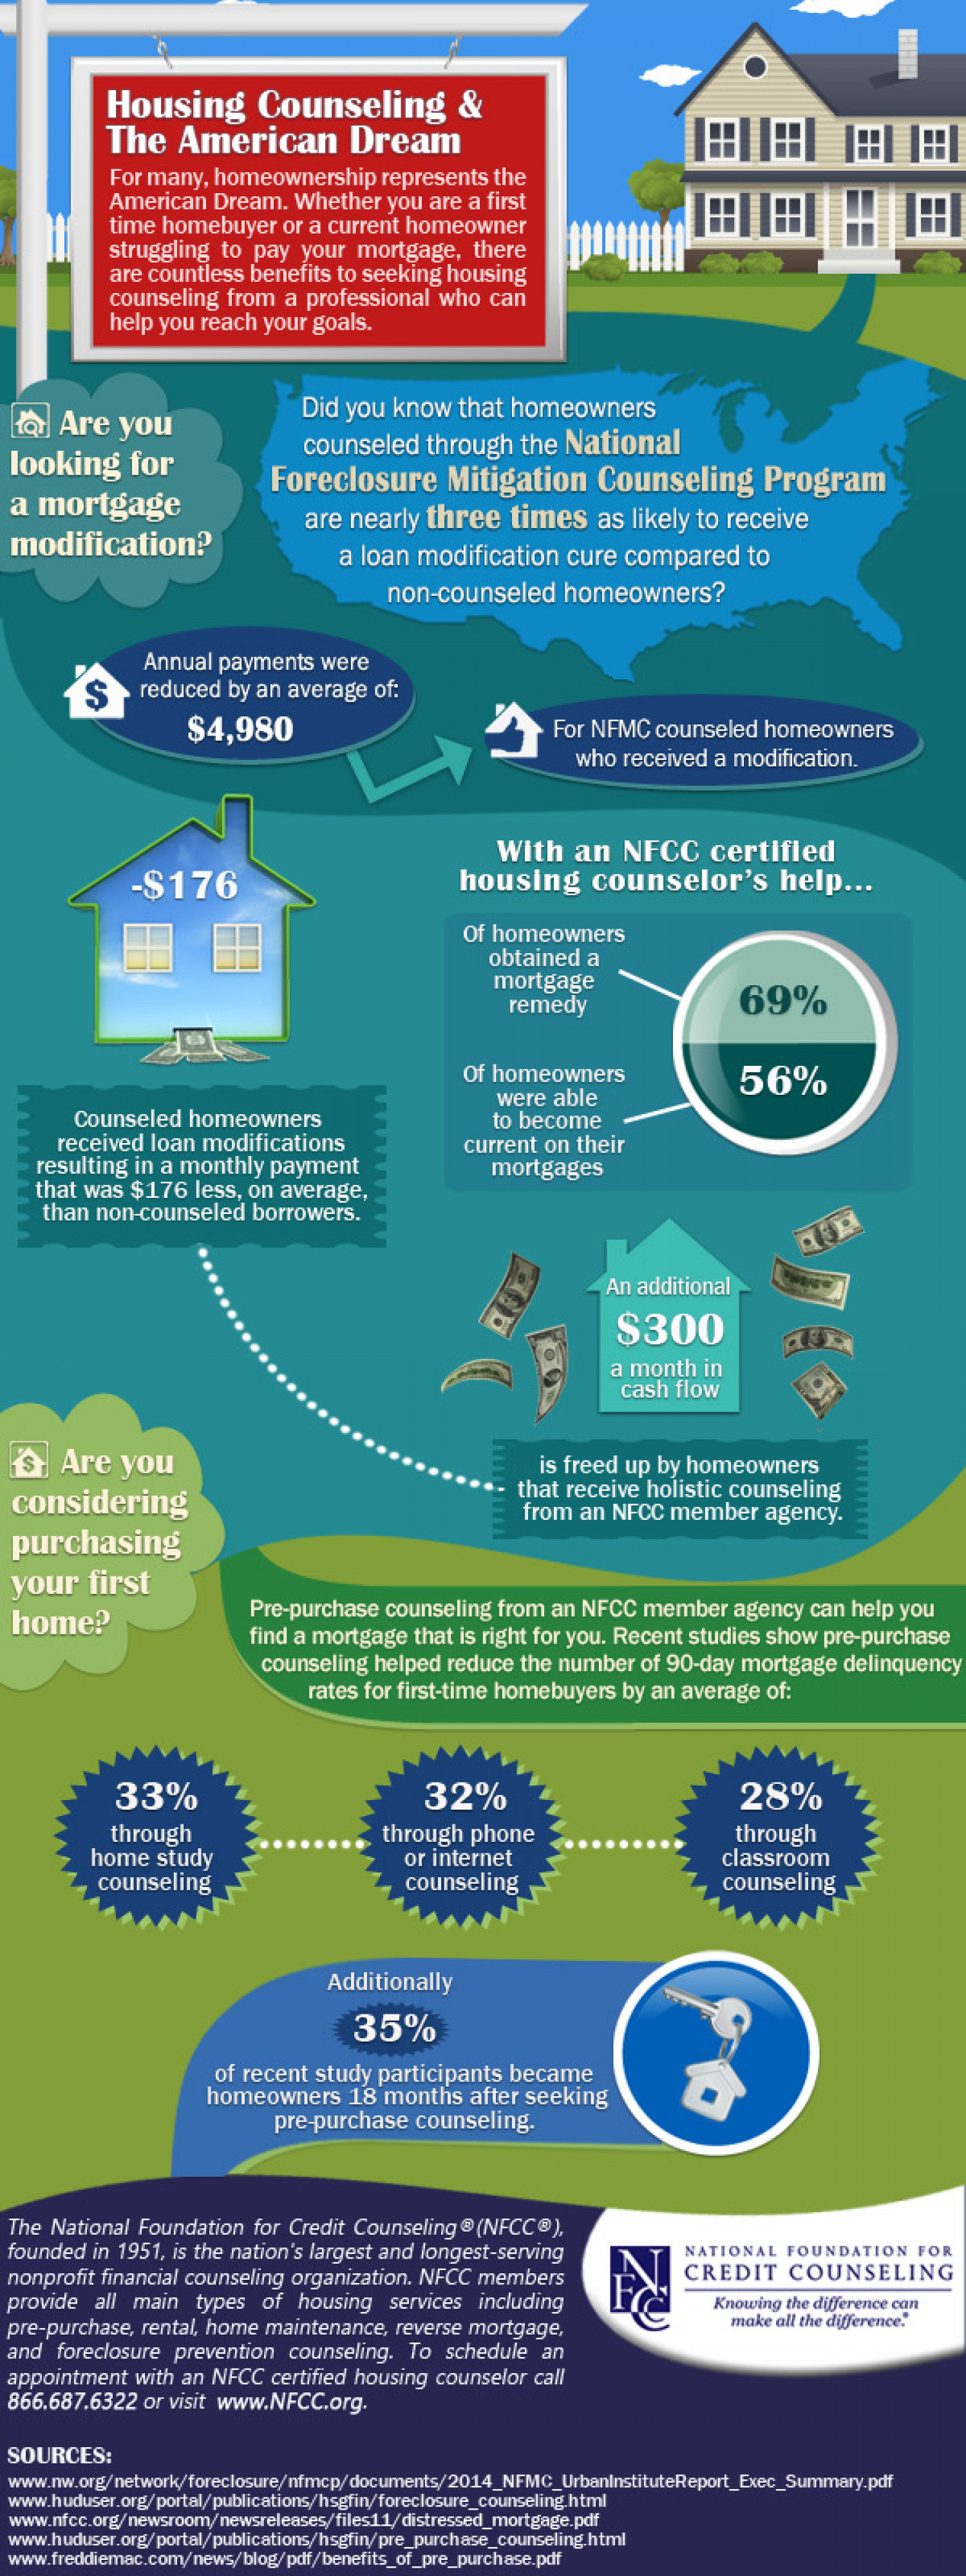 Housing Counseling Can Help You Turn the American Dream into a Reality Infographic